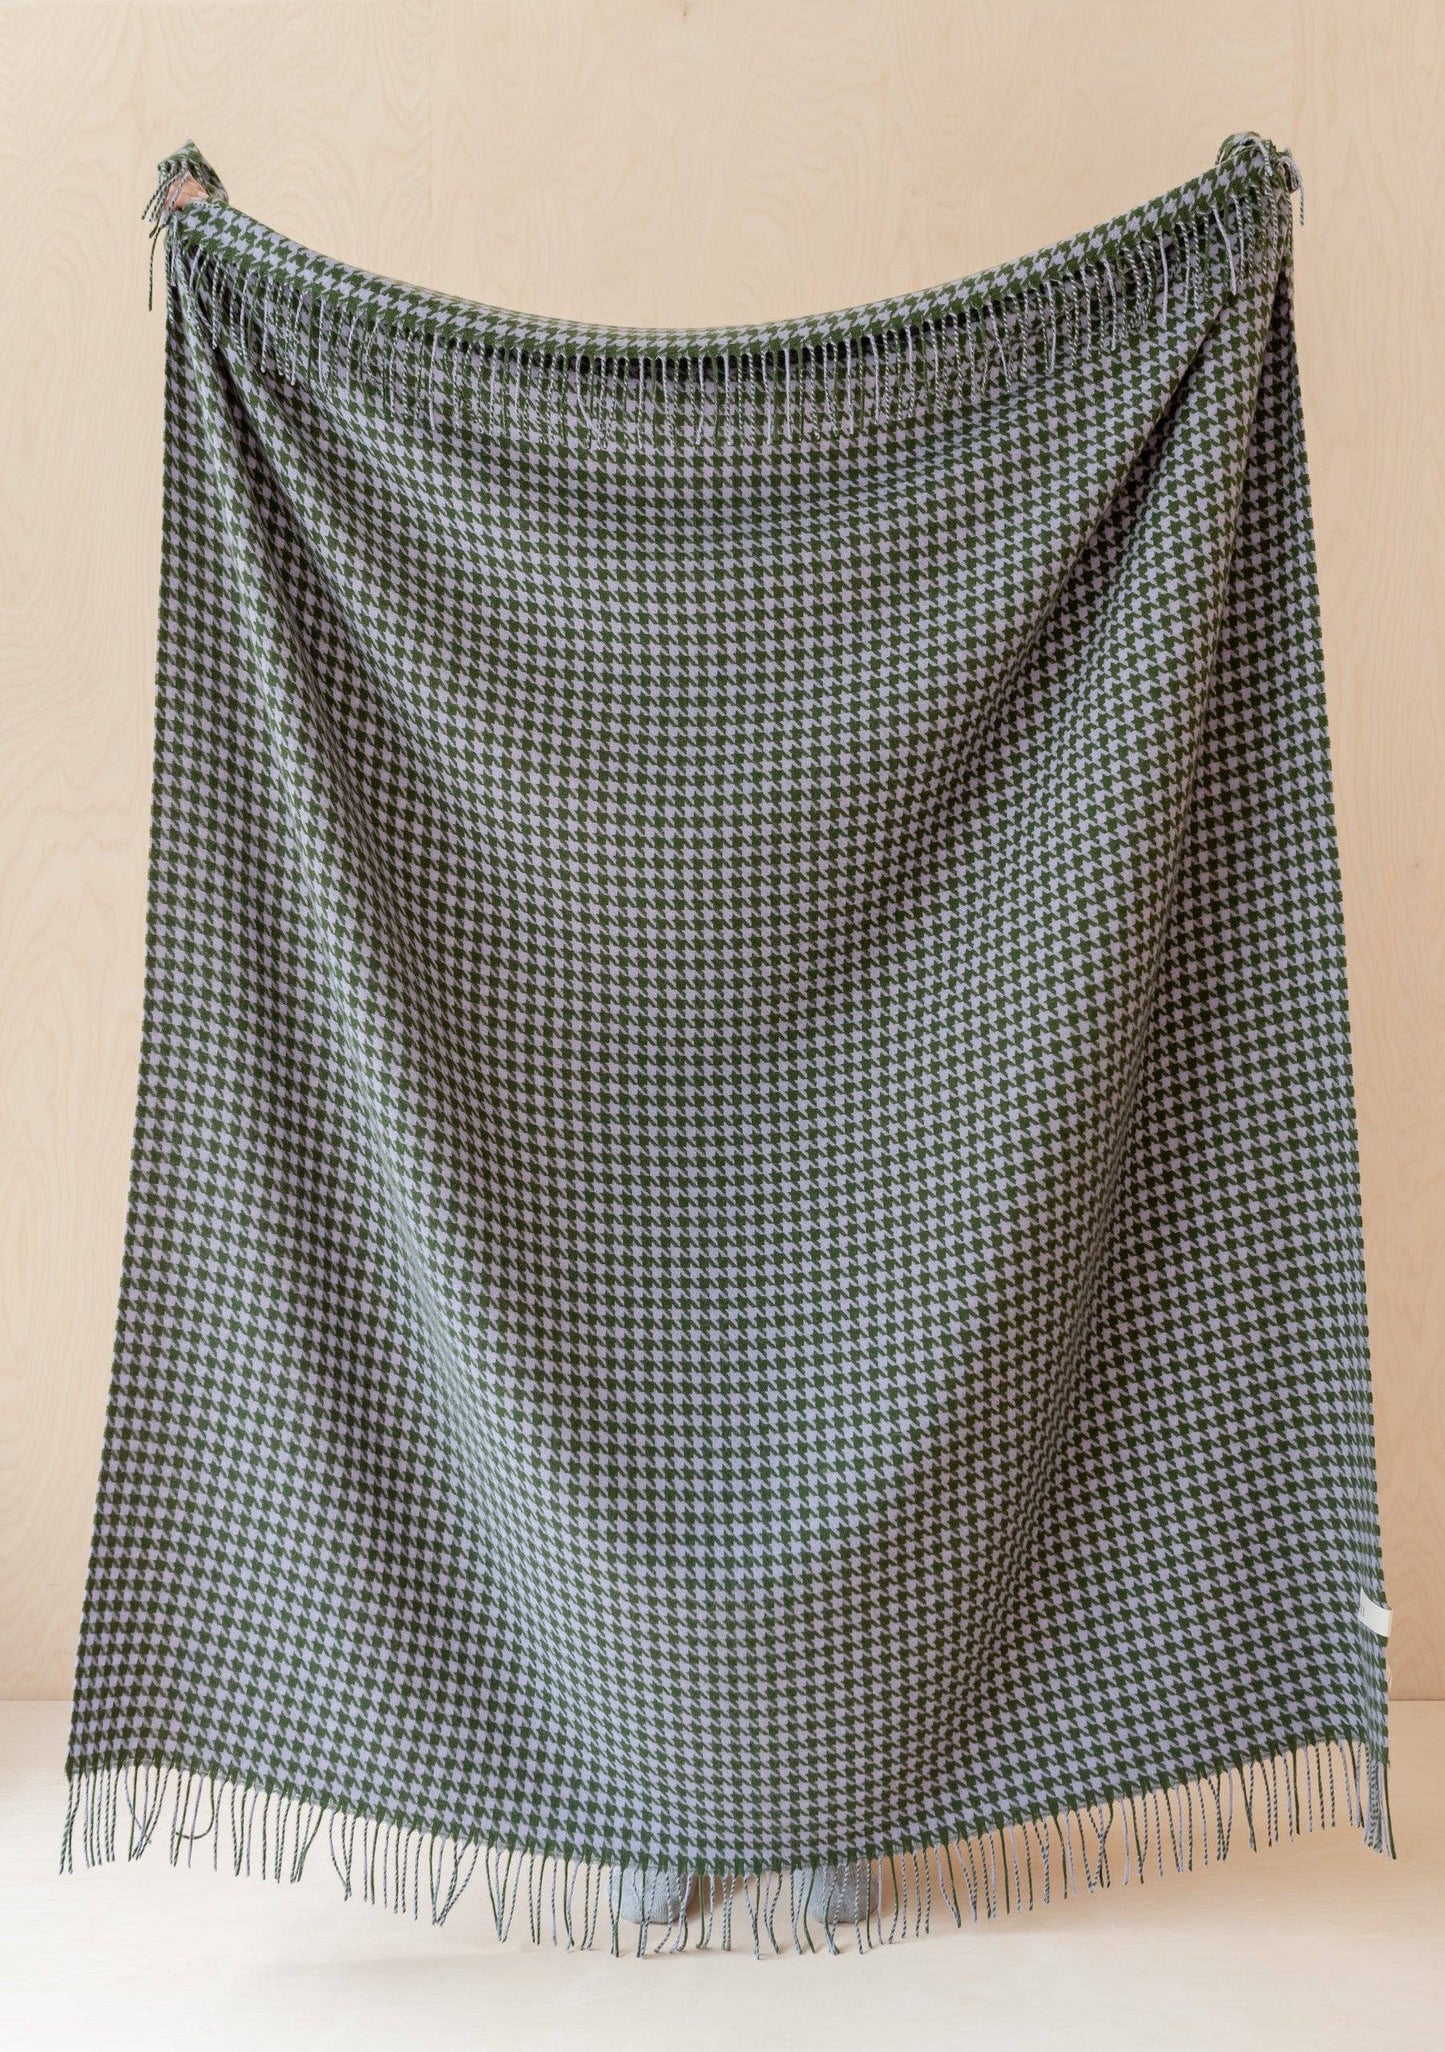 Lambswool Blanket in Olive Houndstooth